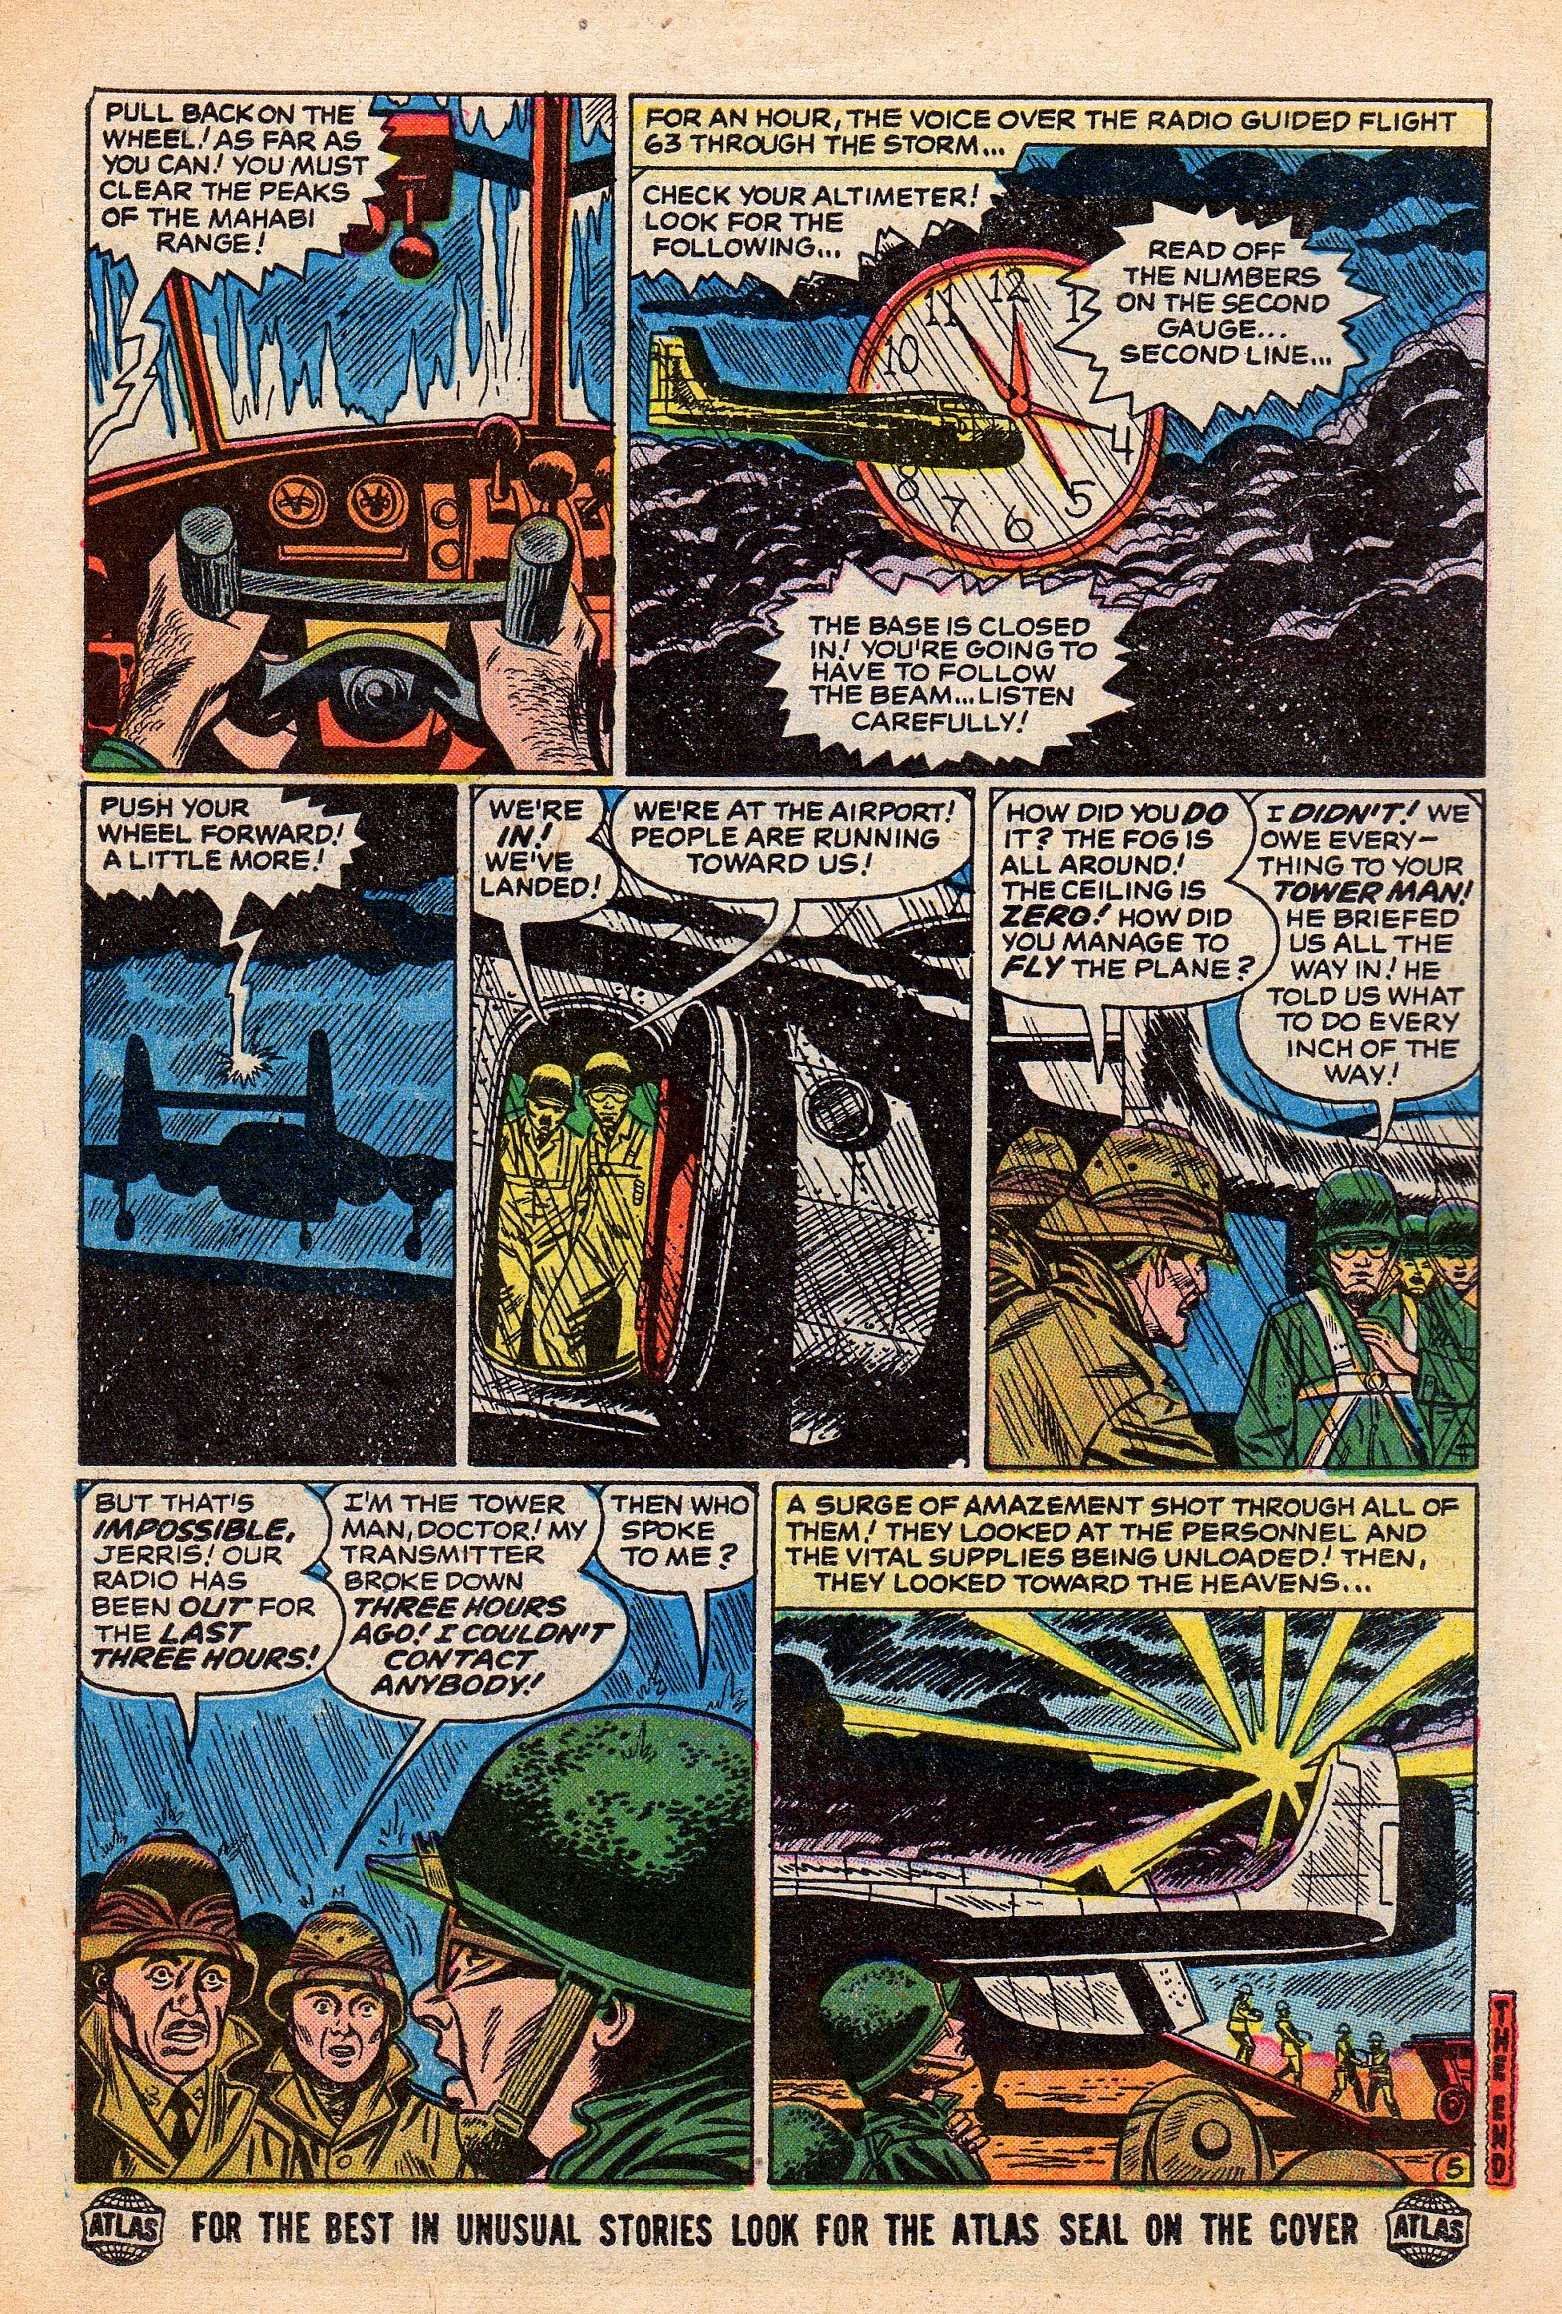 Marvel Tales (1949) 136 Page 13